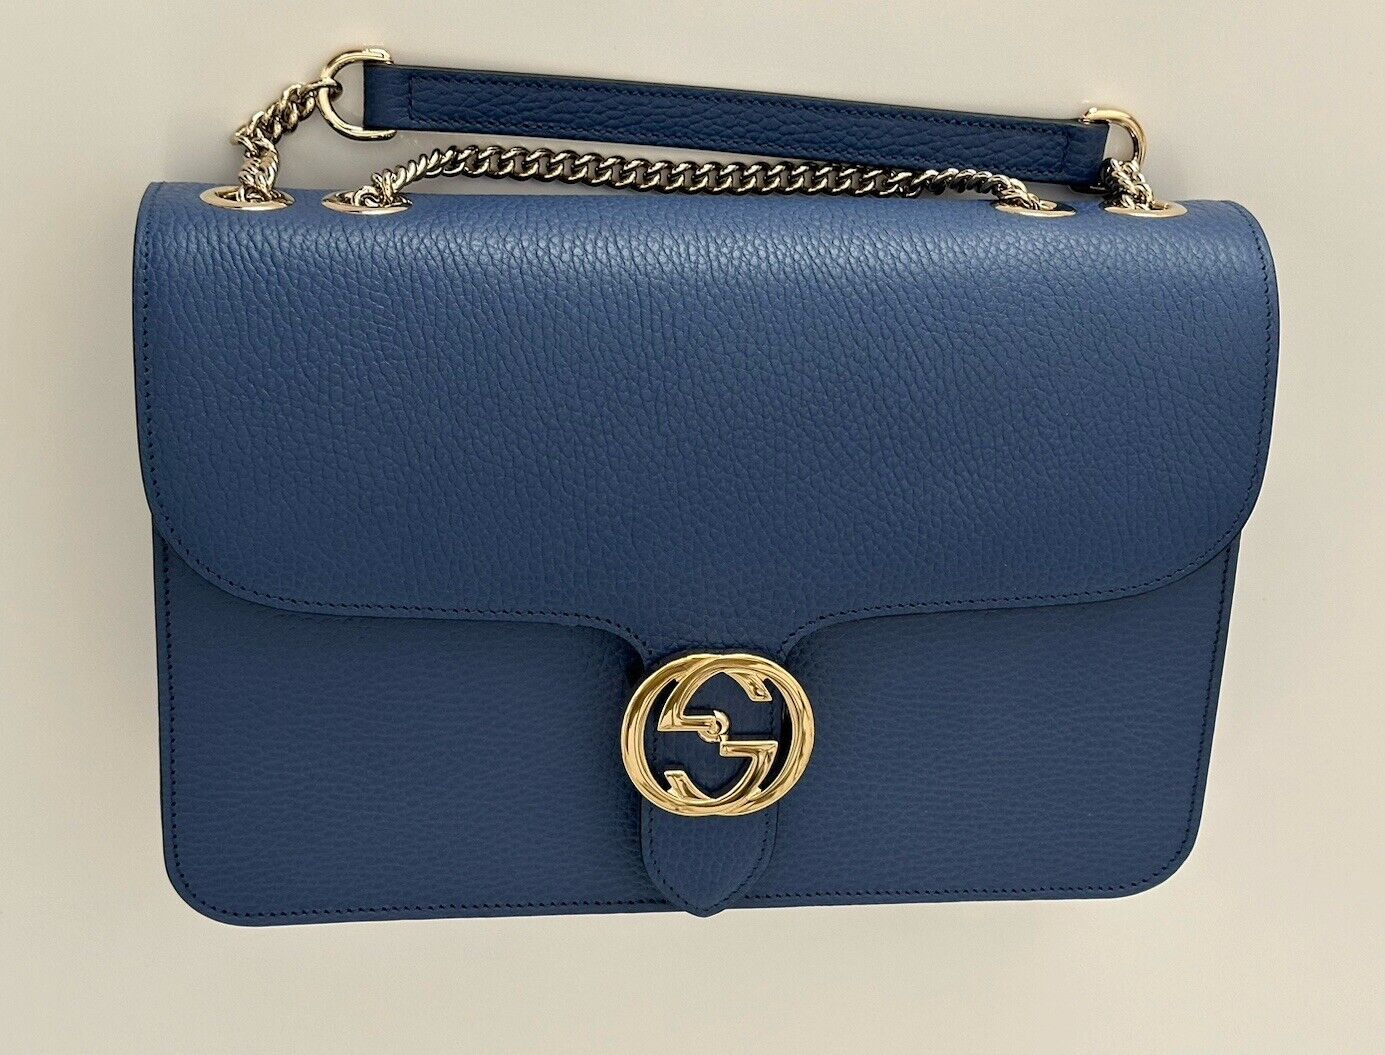 New Gucci Leather Shoulder Handbag Blue Made in Italy 387606